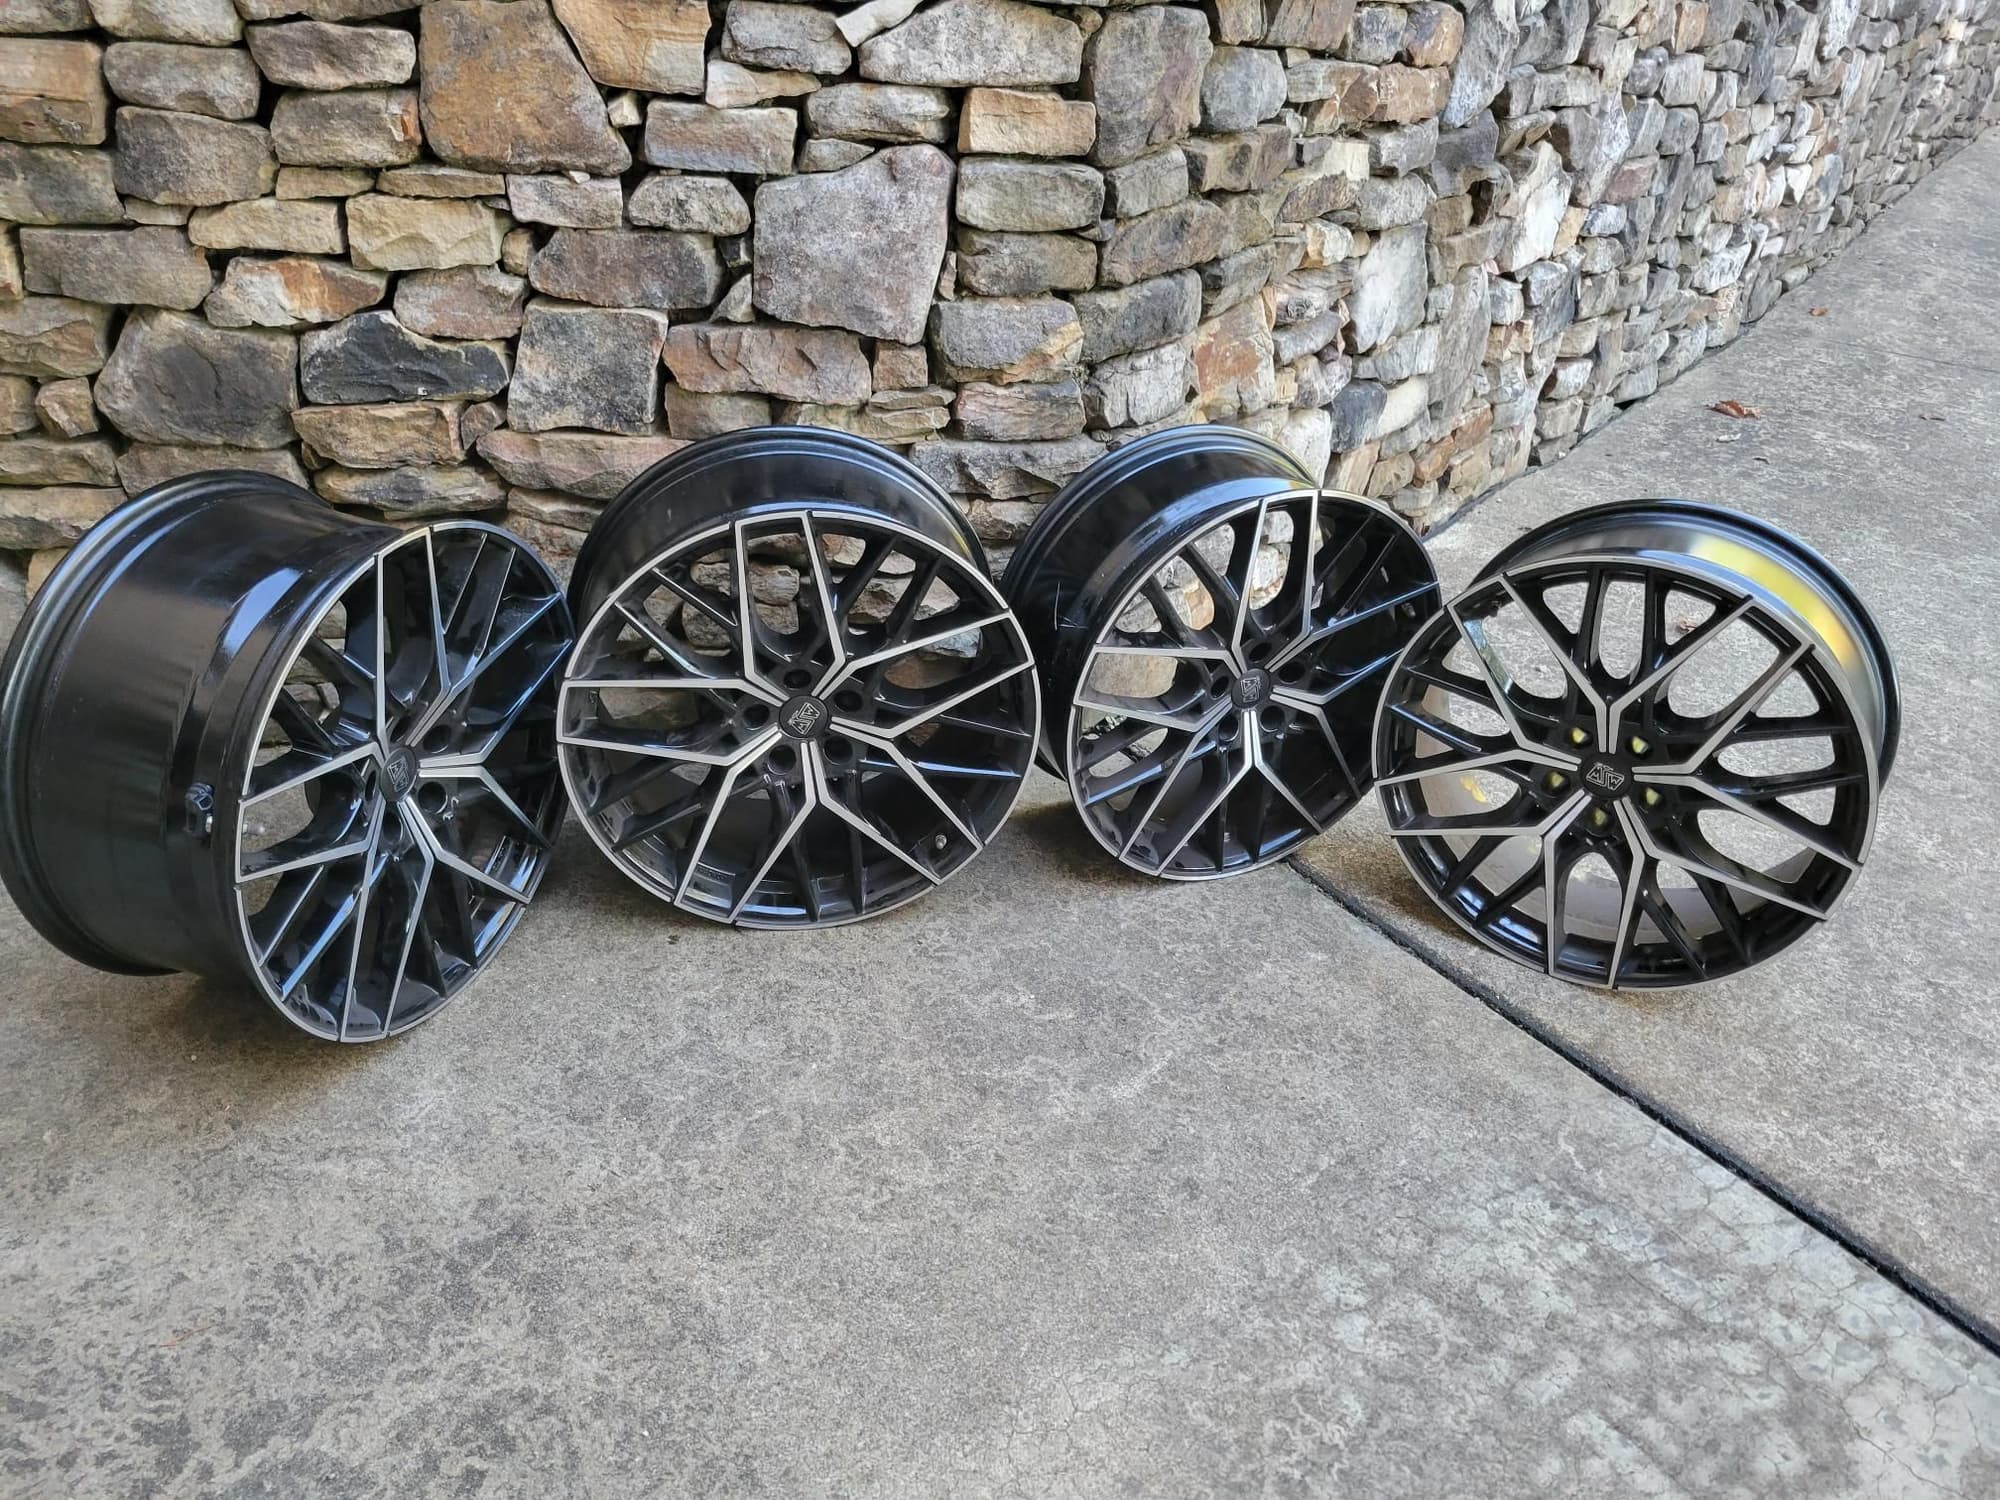 Wheels and Tires/Axles - 20 Inch Wheels for W222 - Used - 2014 to 2020 Mercedes-Benz S550 - Centre, AL 35983, United States